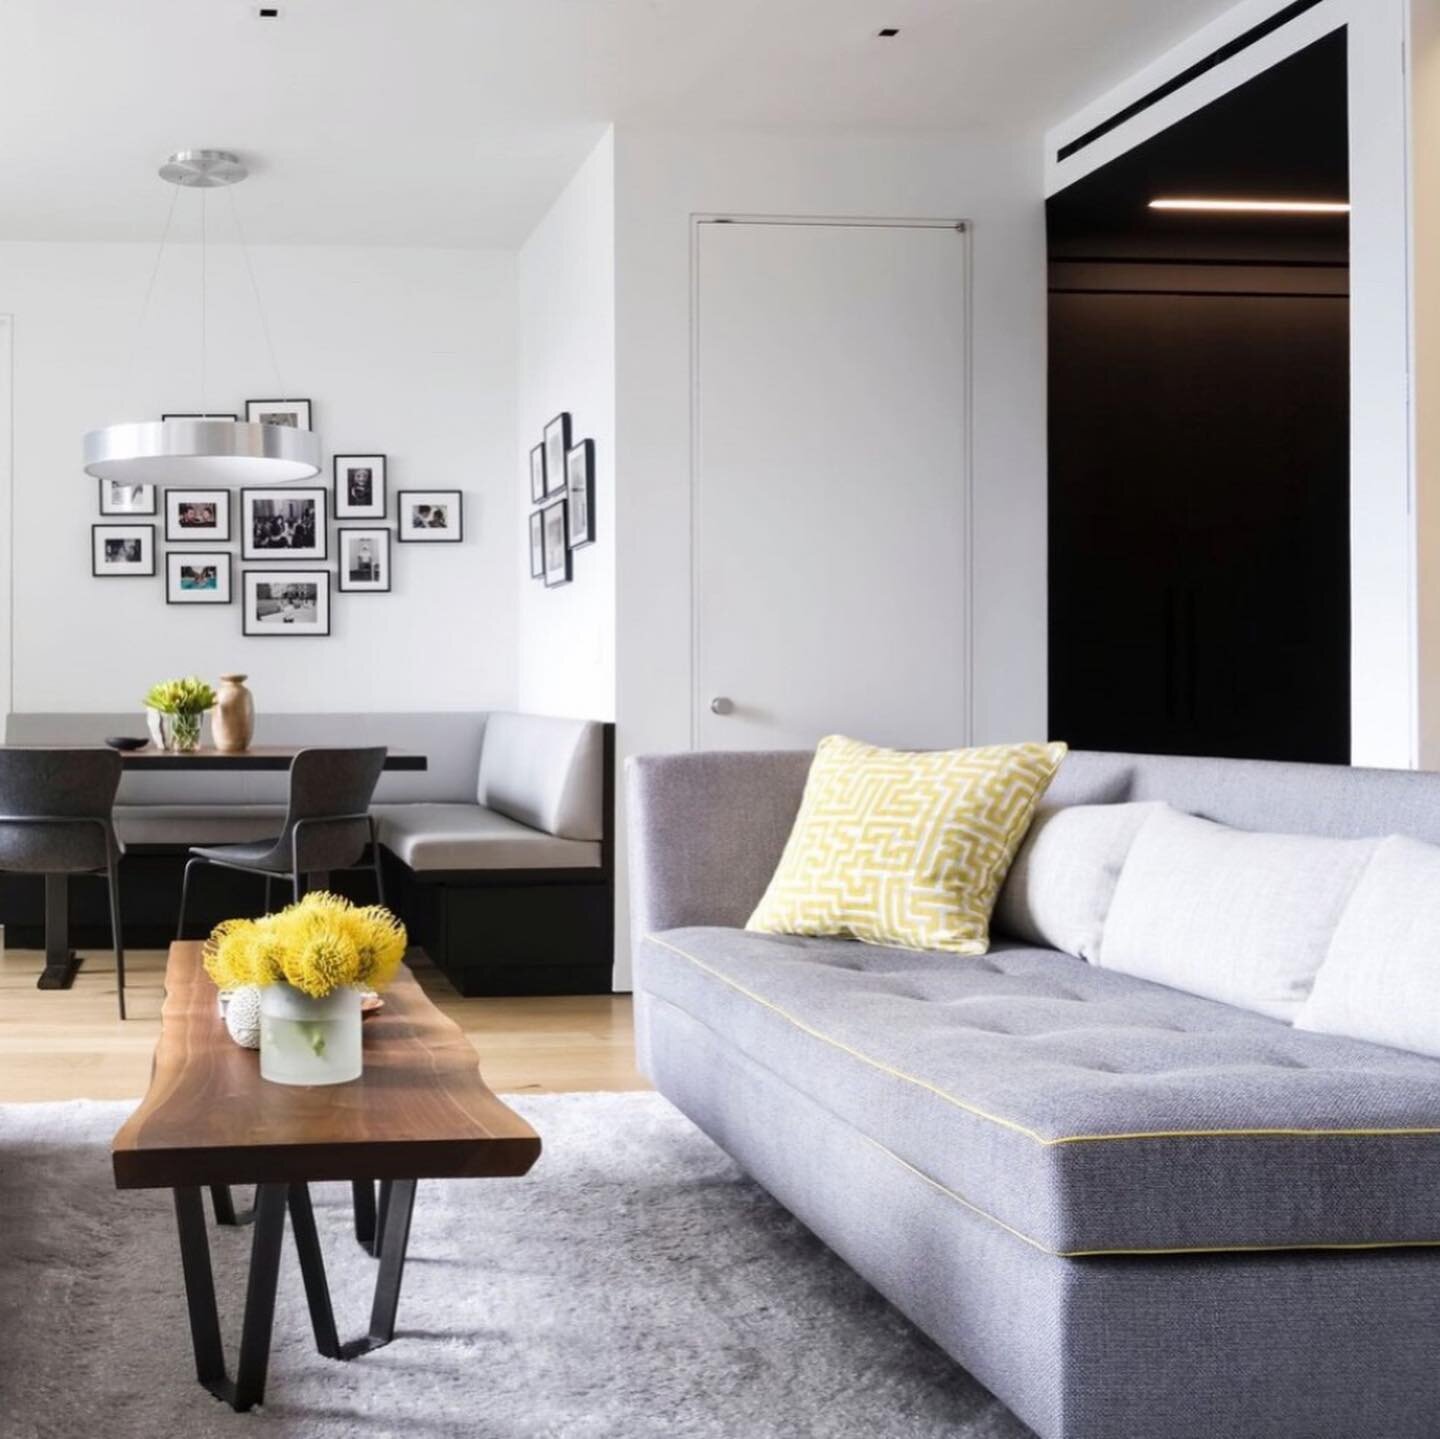 2021 COLOR TREND | Pantone announced the colors of 2021 will be grey &ldquo;ultimate grey&rdquo; and yellow &ldquo;illuminating&rdquo;.

We used these colors in our Organic Modern project.  The grey was used as the base for the color scheme and the y